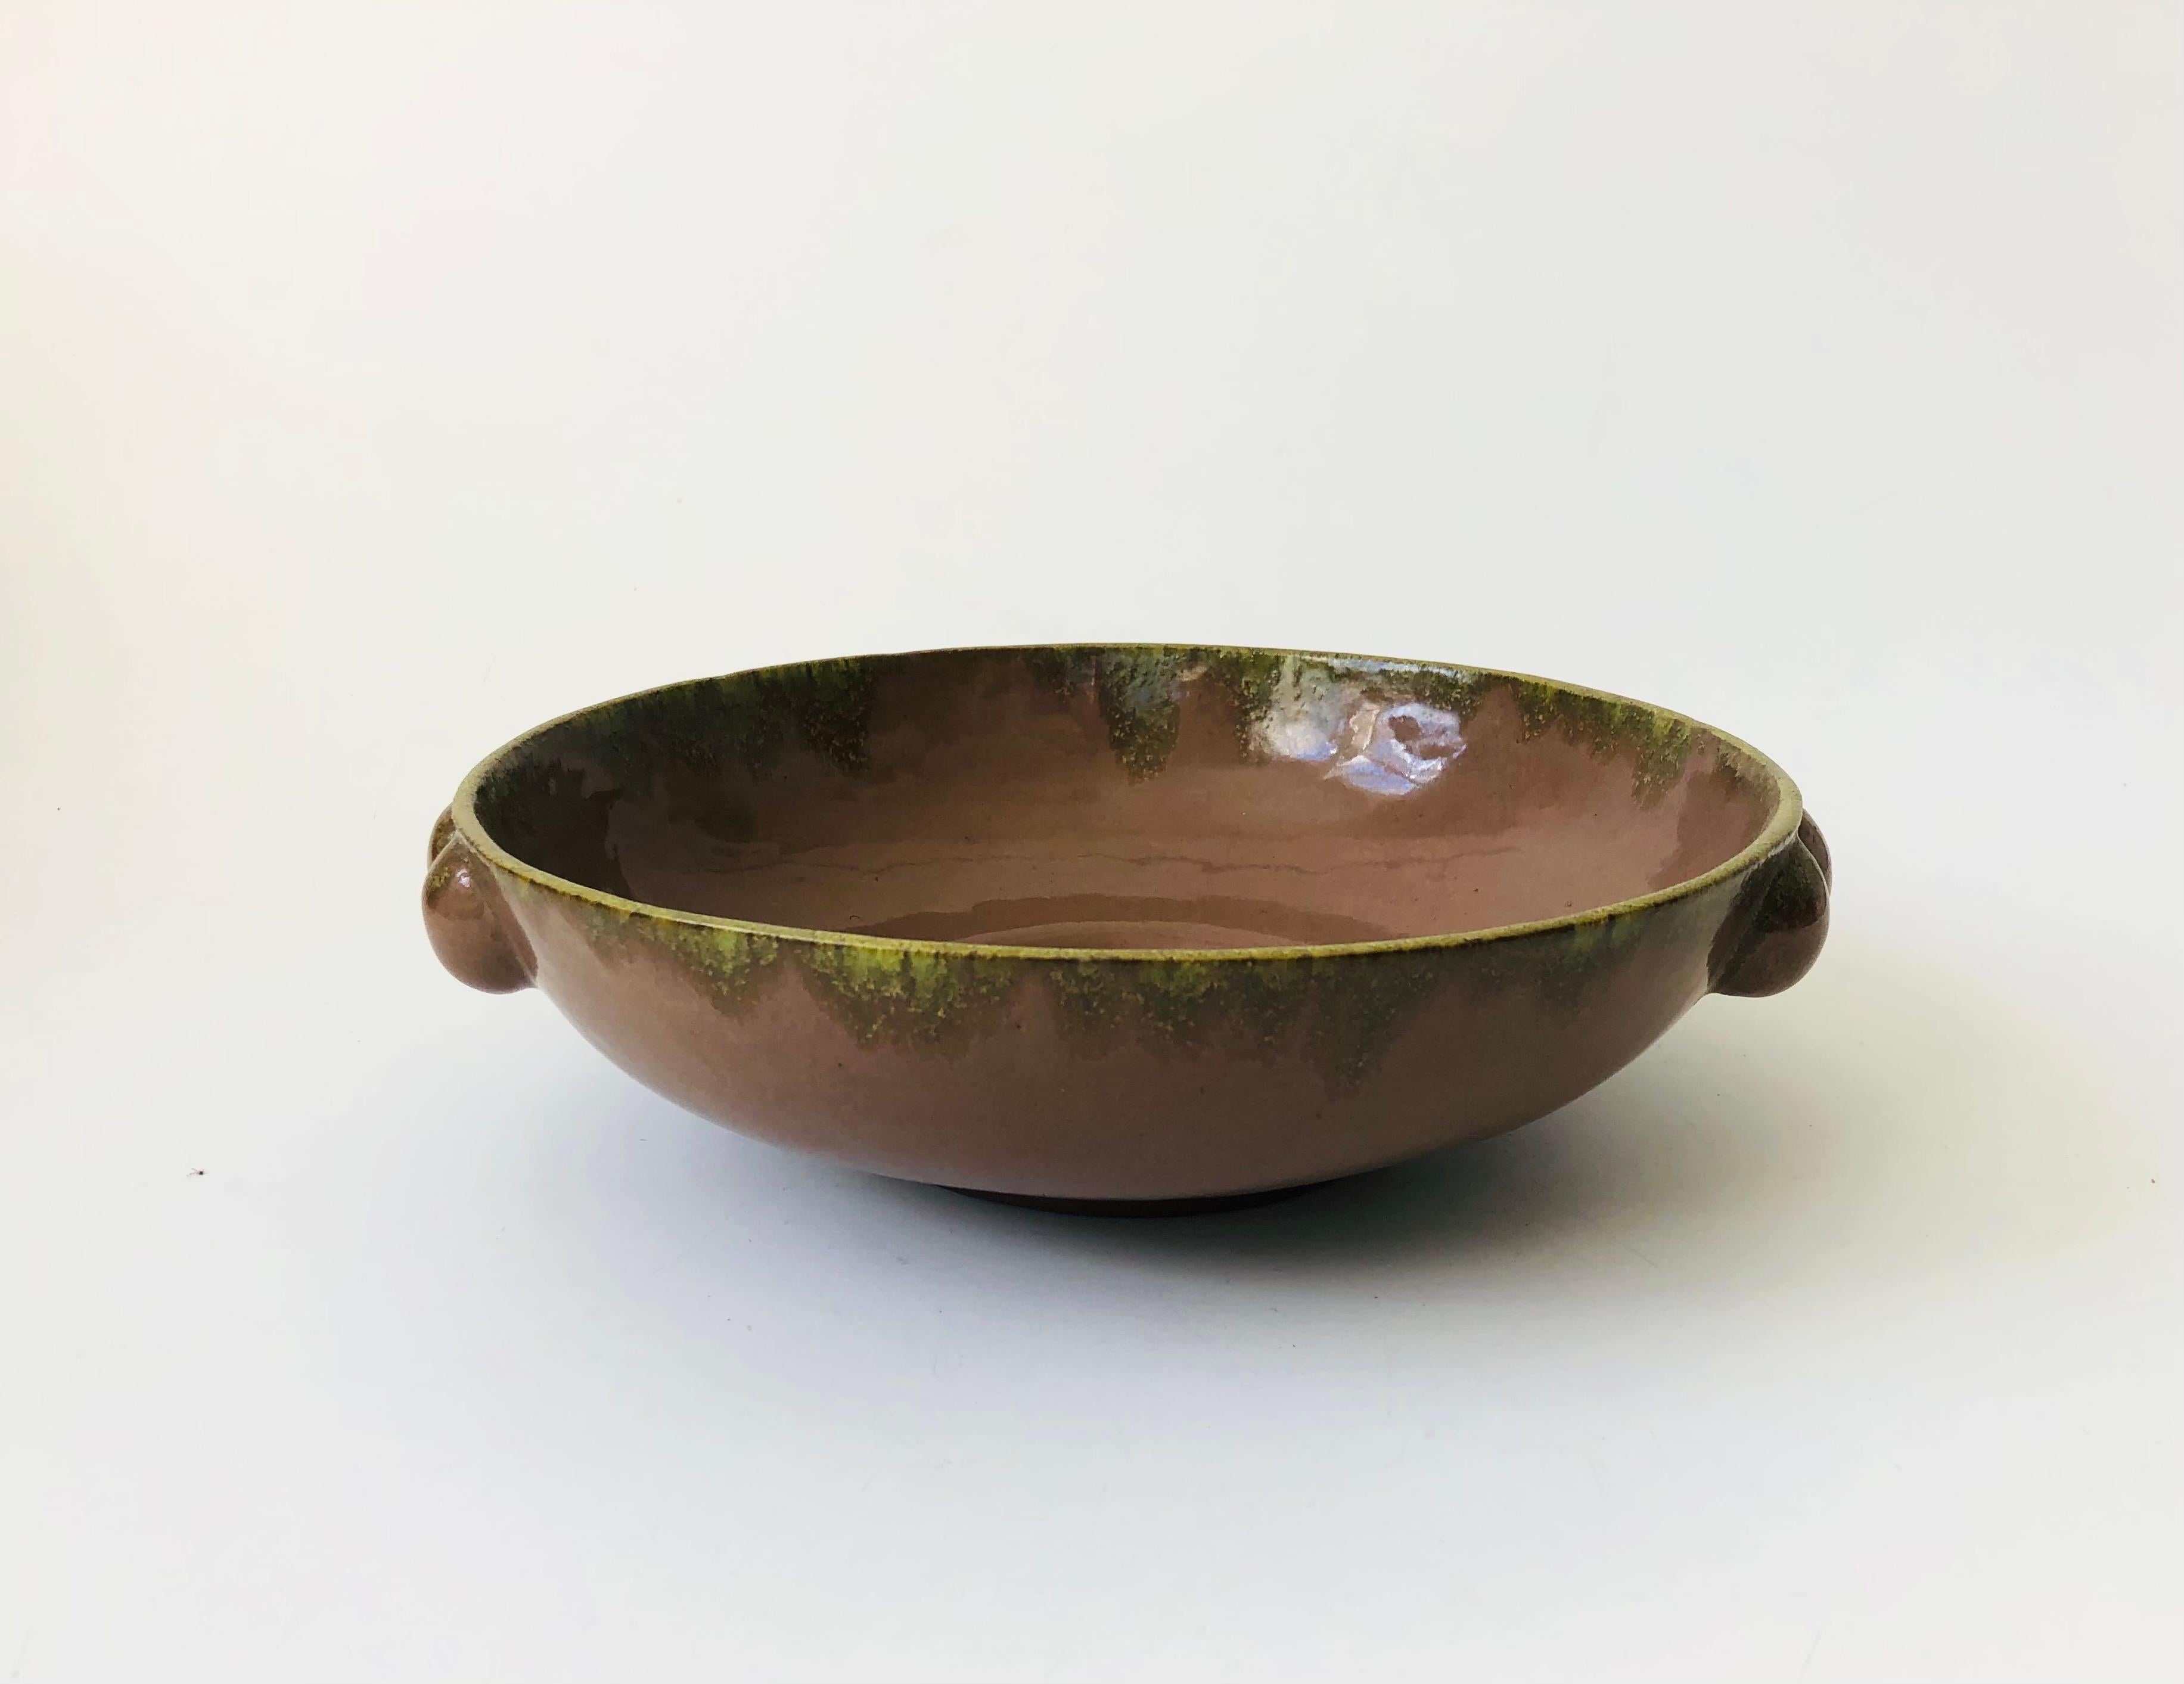 A vintage Art Deco bowl by California ceramicist Cole Merris, circa 1940. Beautiful natural brown glaze with a green glaze accent along the rim. Nice large size for a variety of uses. Round knobs have been formed on 2 sides to create handles. Signed